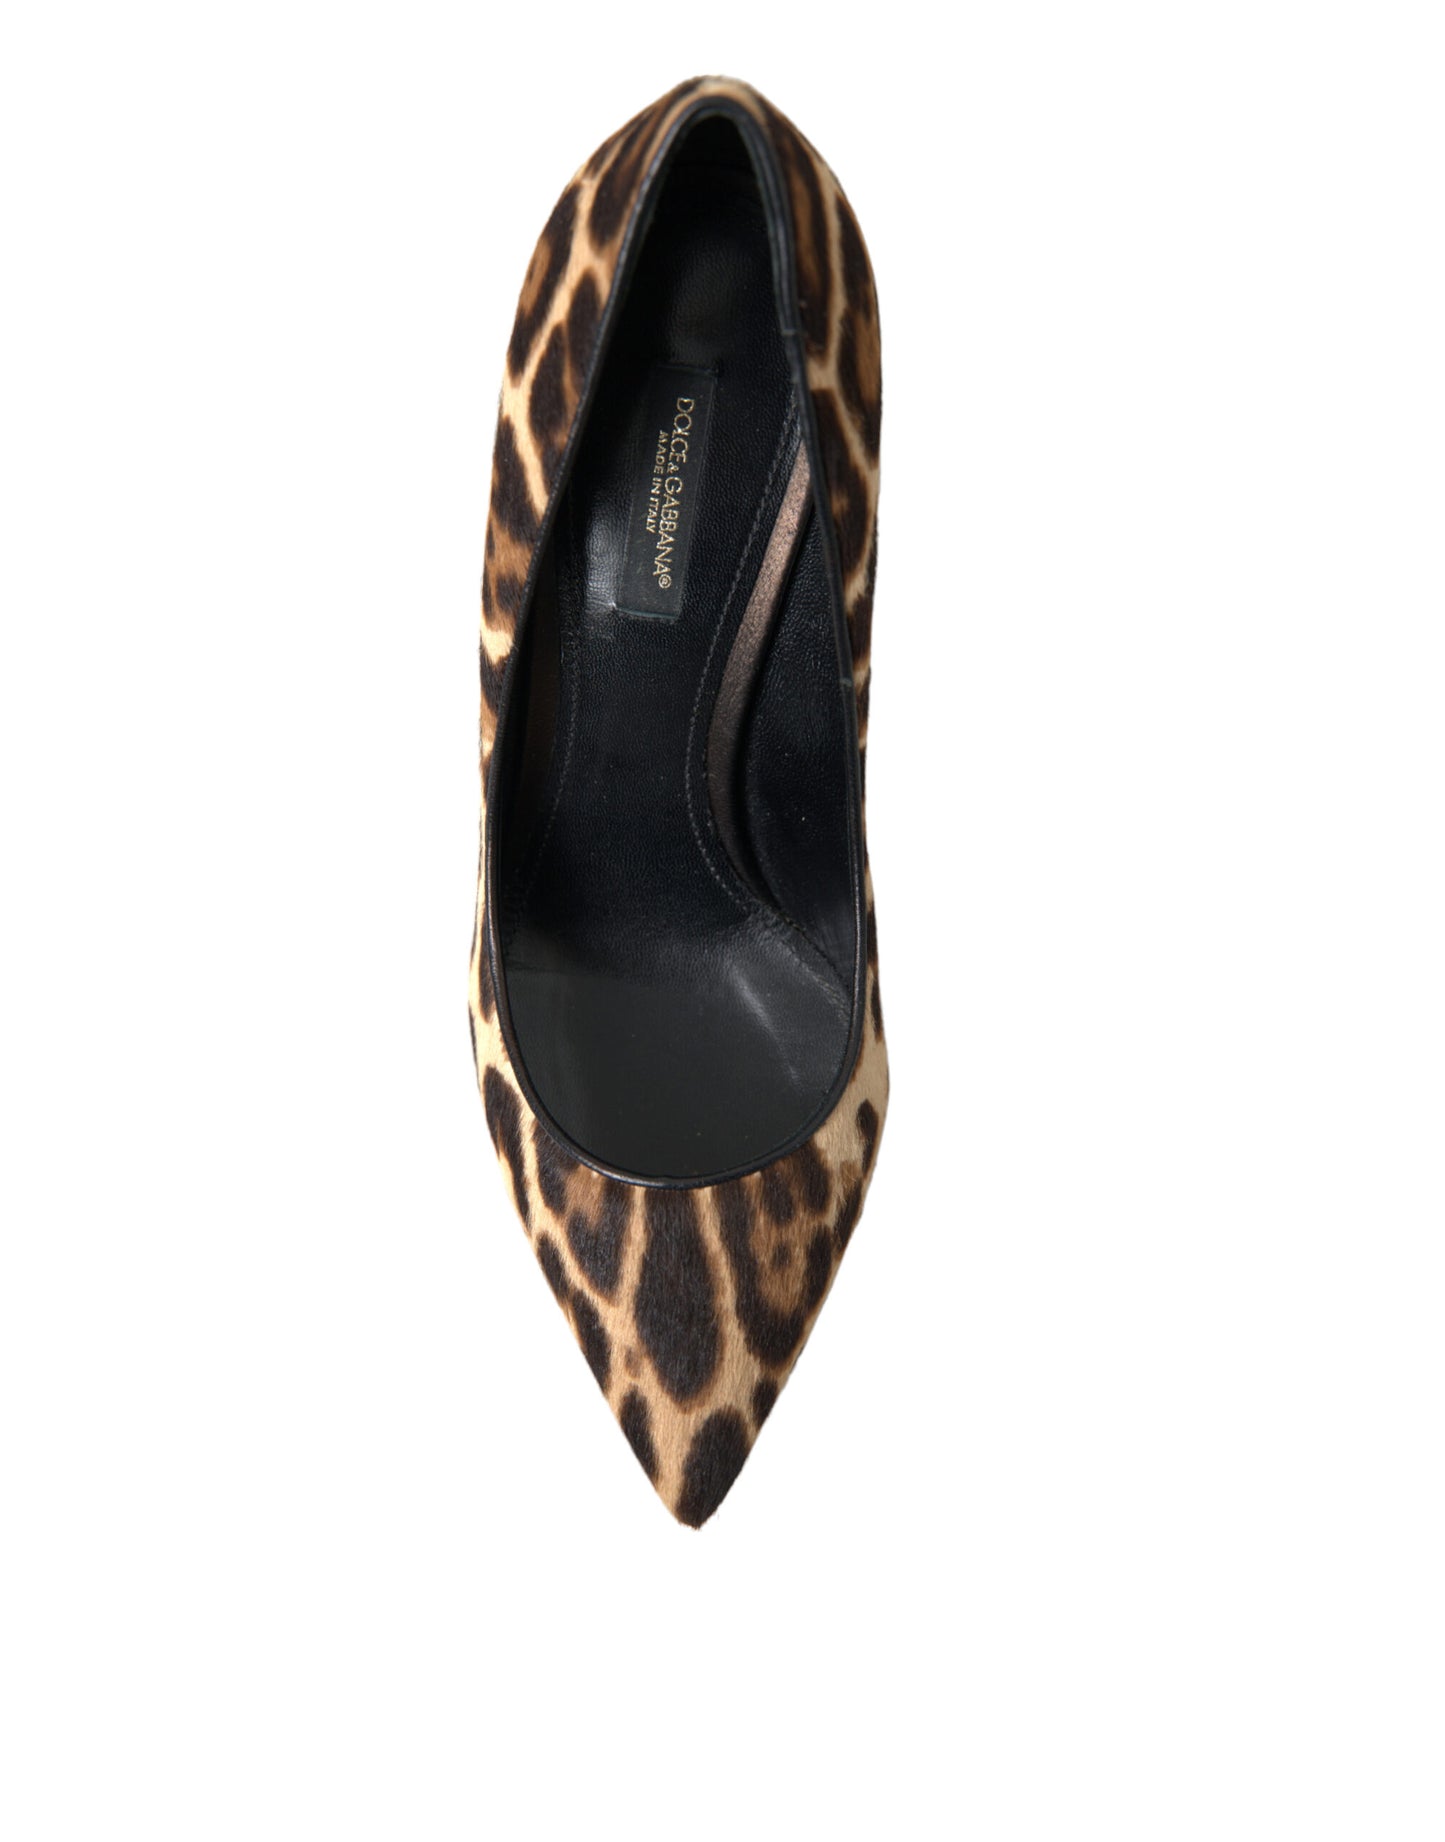 Dolce & Gabbana Brown Leopard Pony Hair Leather Heels Shoes